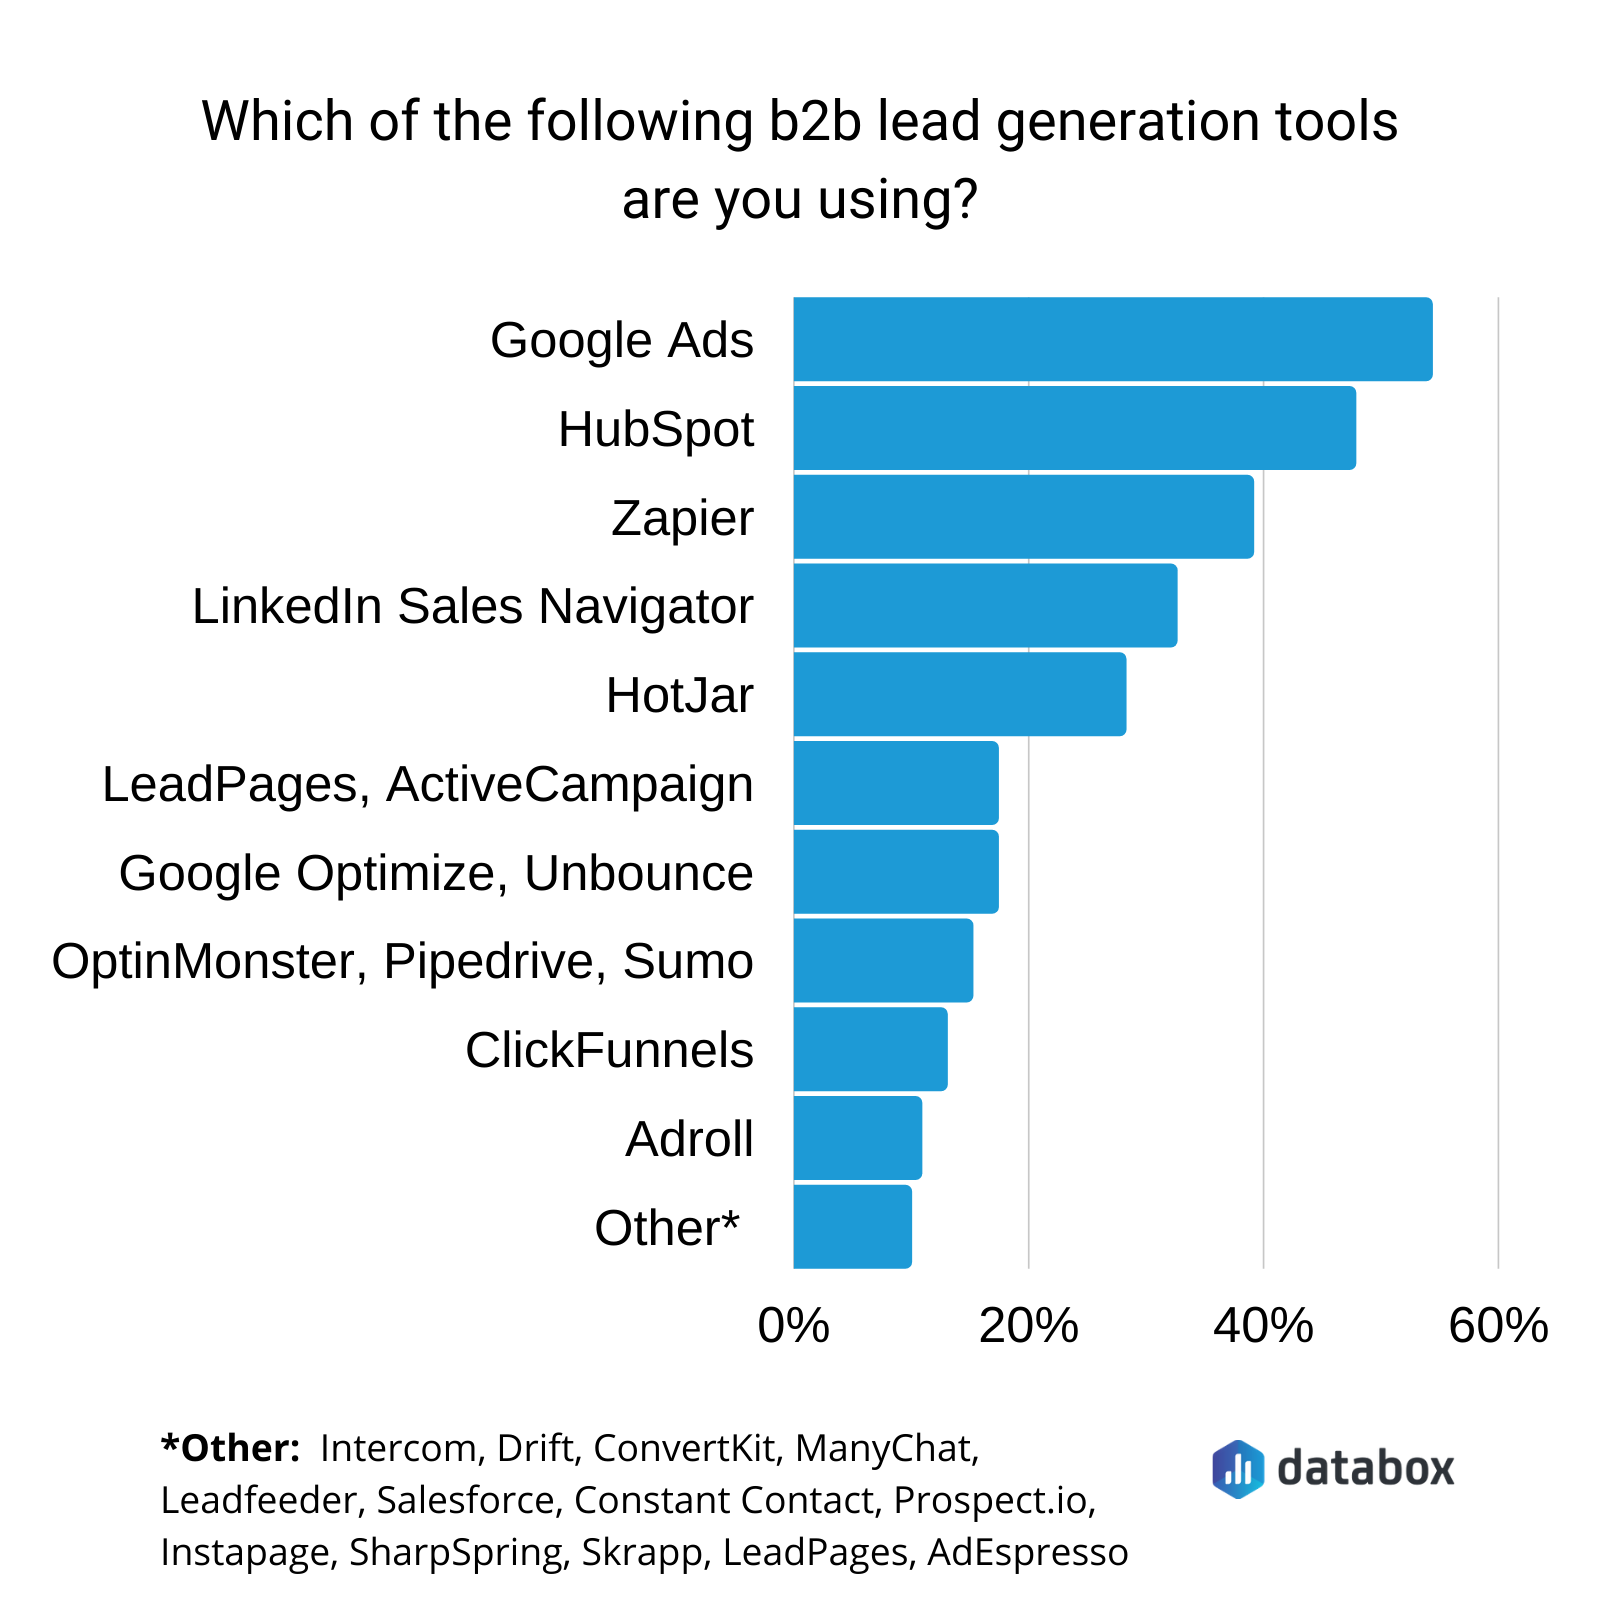 which of the following b2b lead generation tools are you using?